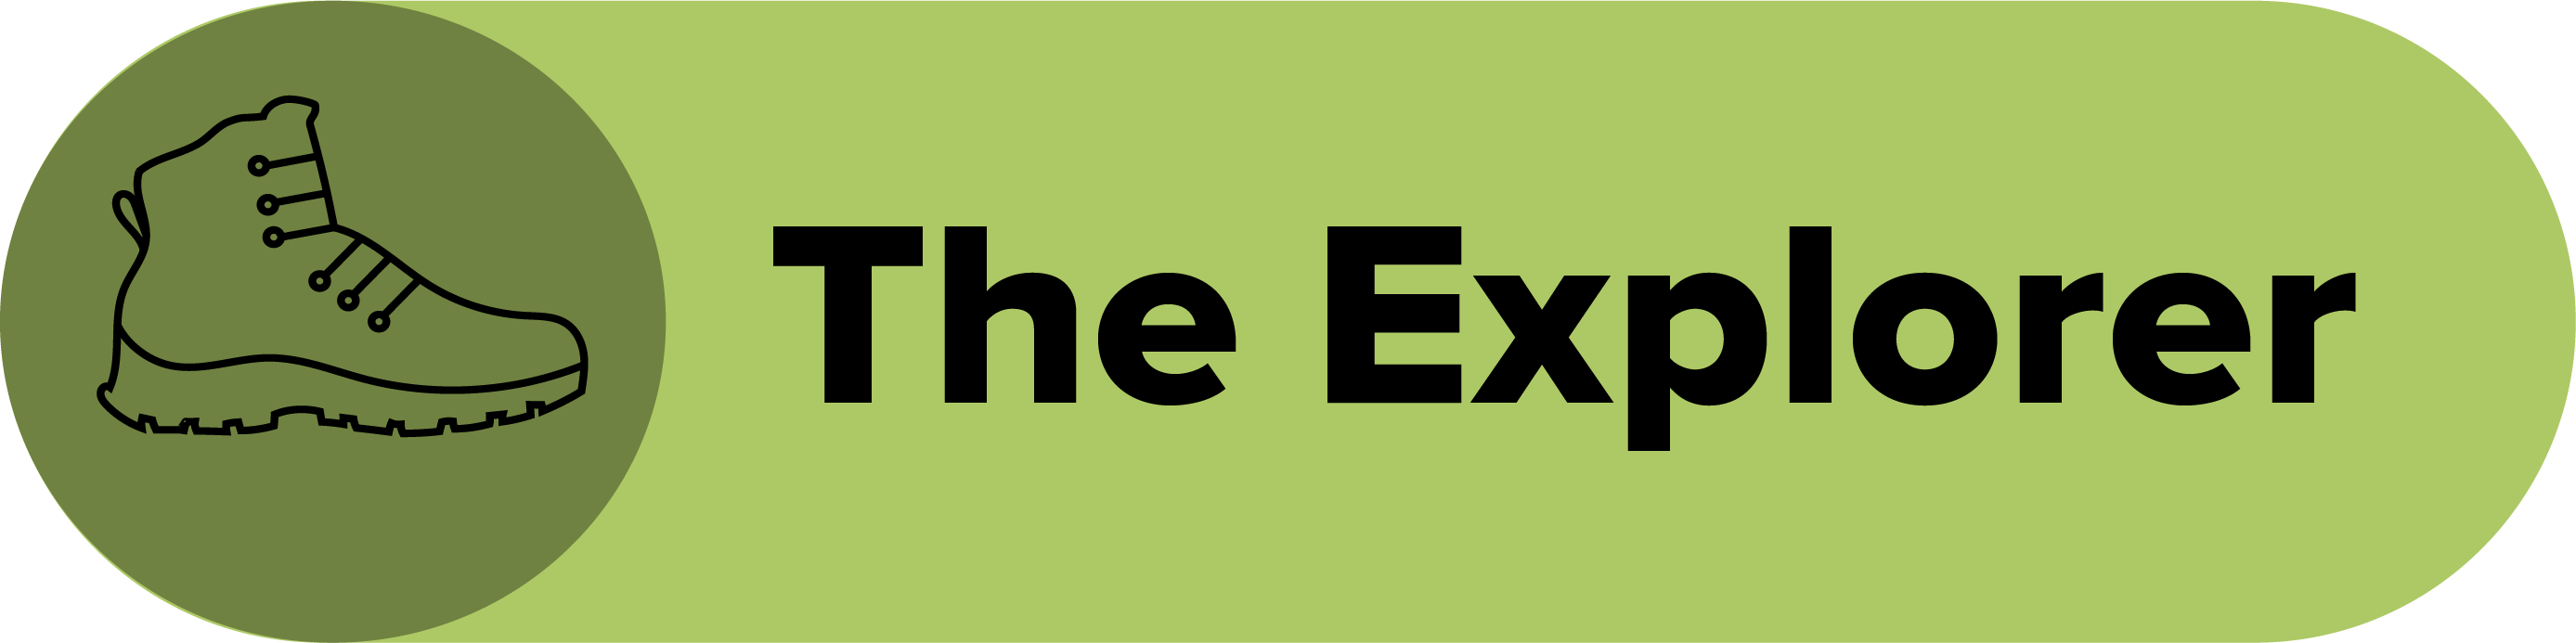 A green box contains a graphic of a hiking boot with text reading "The Explorer"